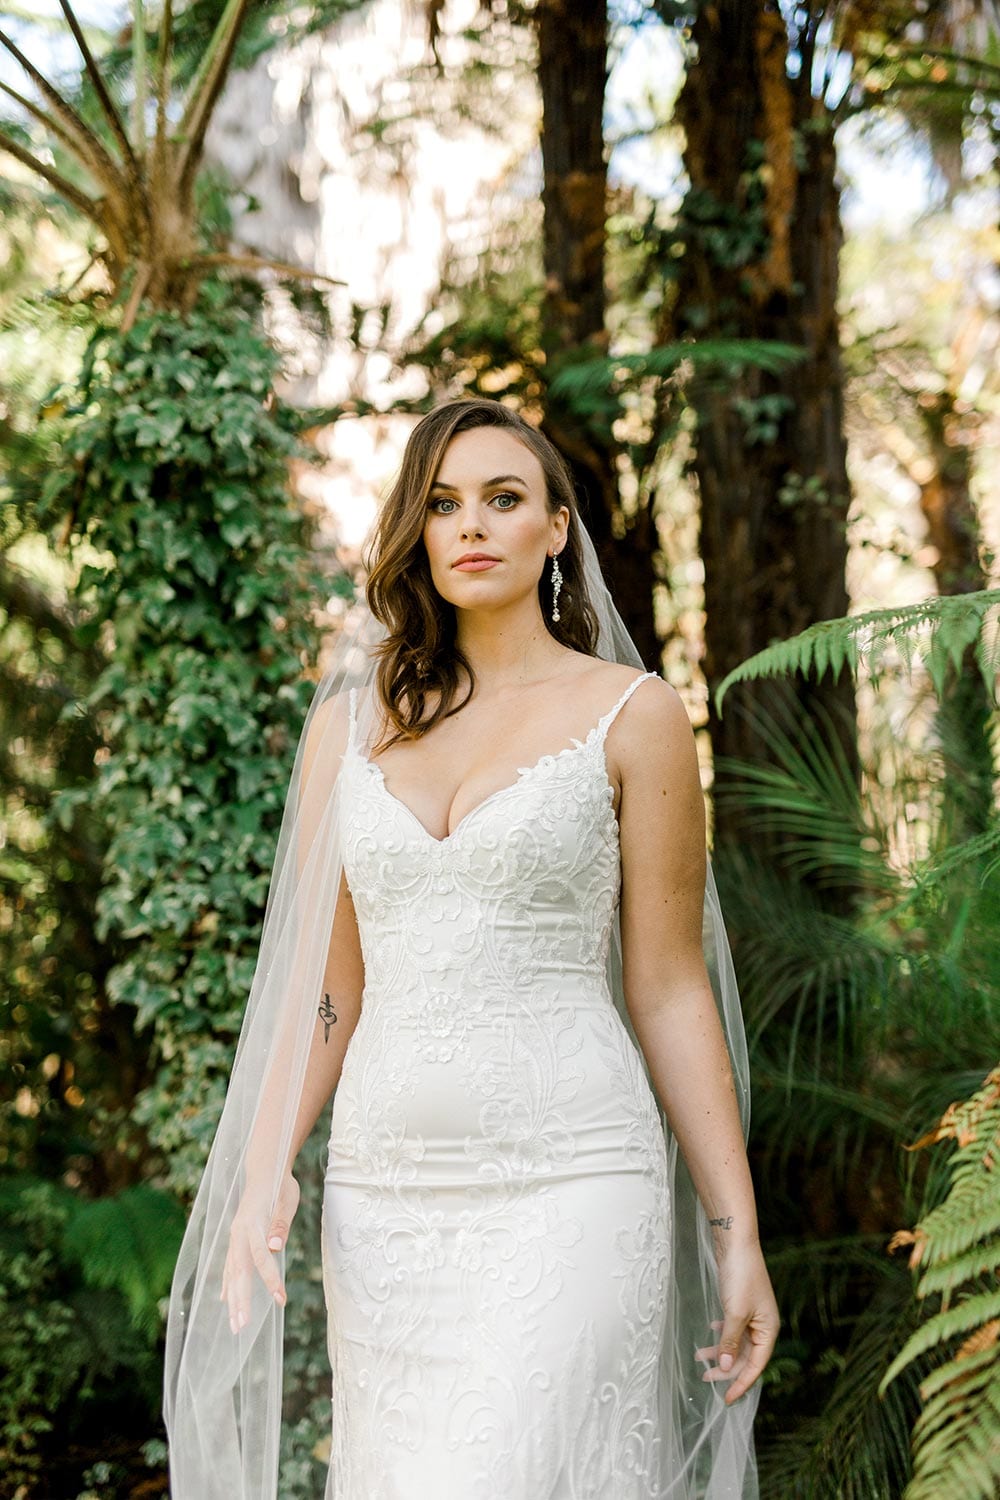 Sahara Wedding Dress from Vinka Design. Stunning fitted lace wedding gown. Lightly-beaded floral lace highlights the ivory stretch satin base. Sweetheart neckline & low back with beautiful lace detail. Detail of top of dress. Photographed in landscaped gardens.